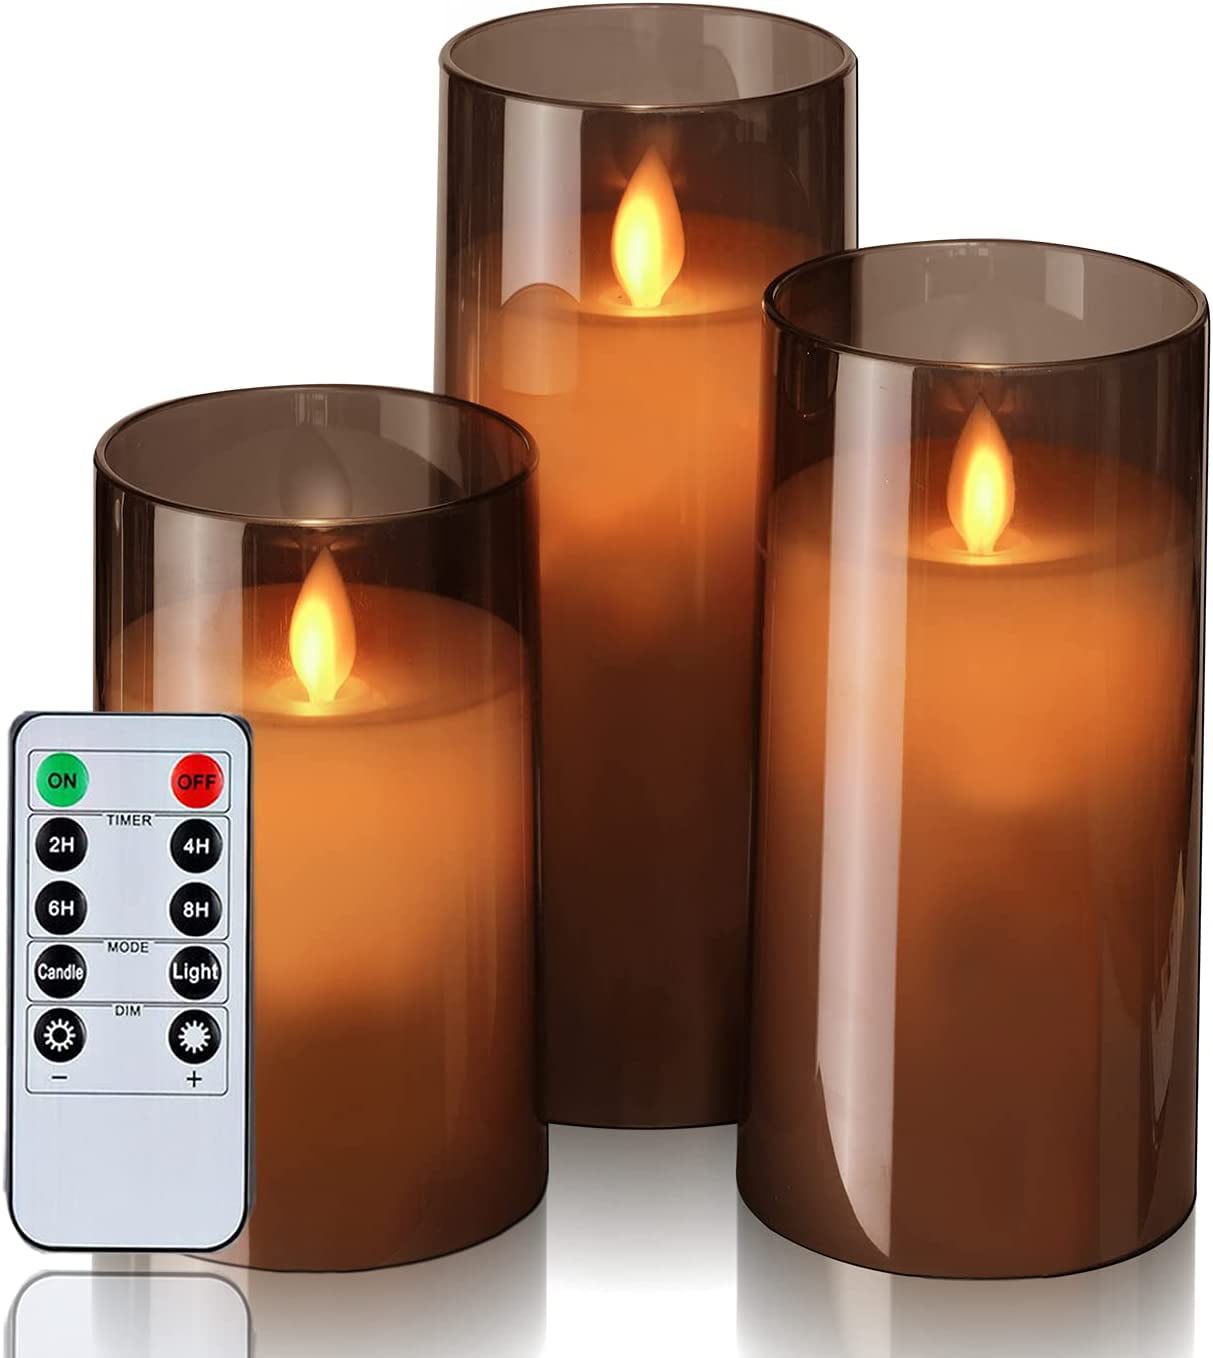 Set of 3 Battery Operated Acrylic LED Pillar Candles with Remote Control and Timer Homemory White Flickering Flameless Candles 